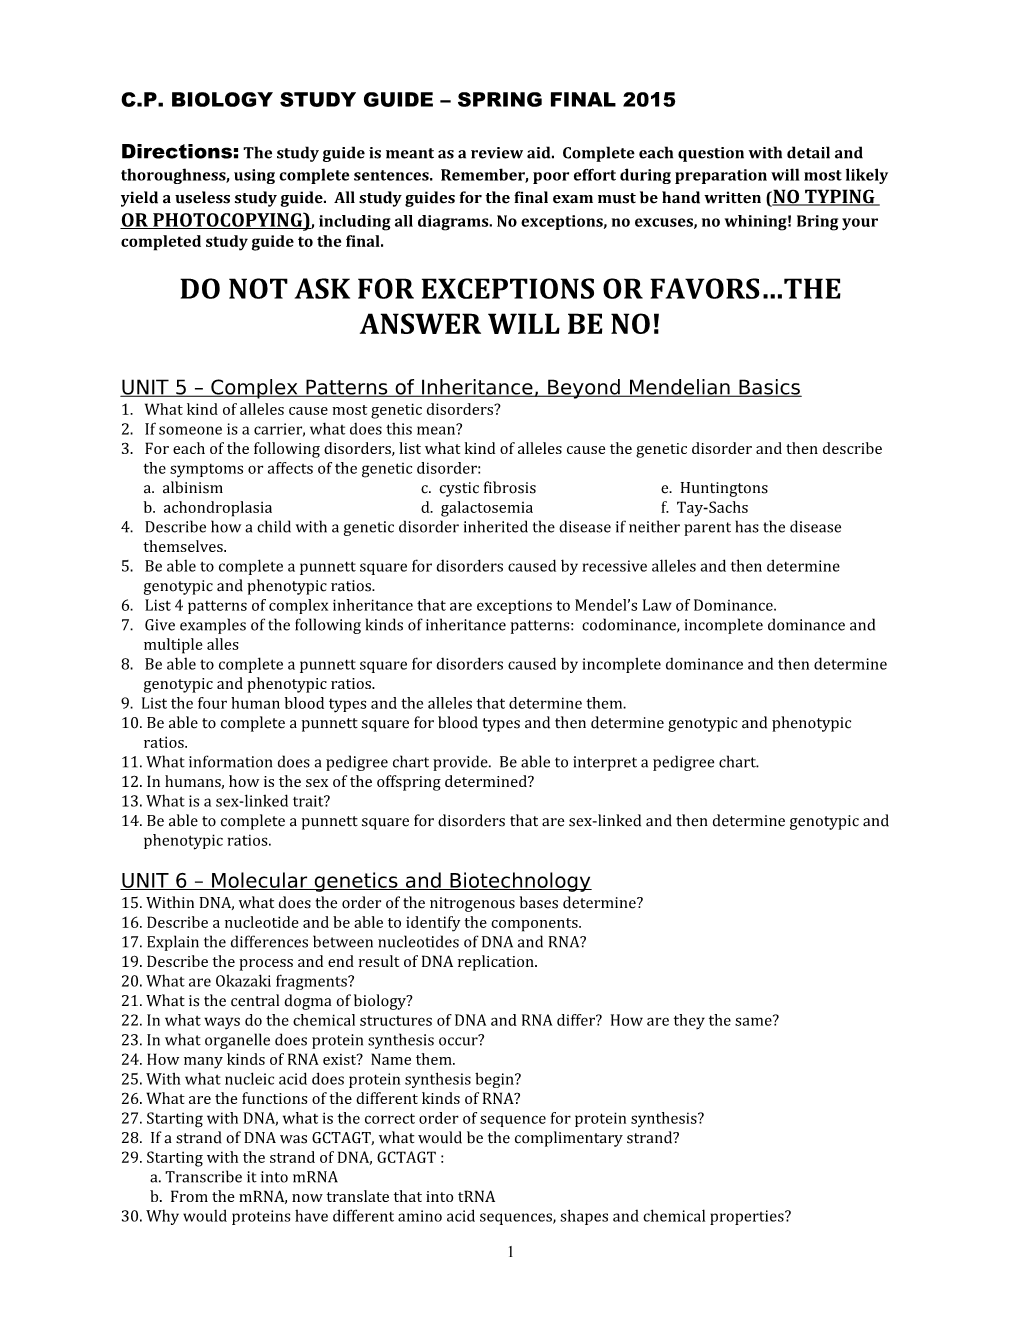 C.P. Biology Study Guide Spring Final 2015